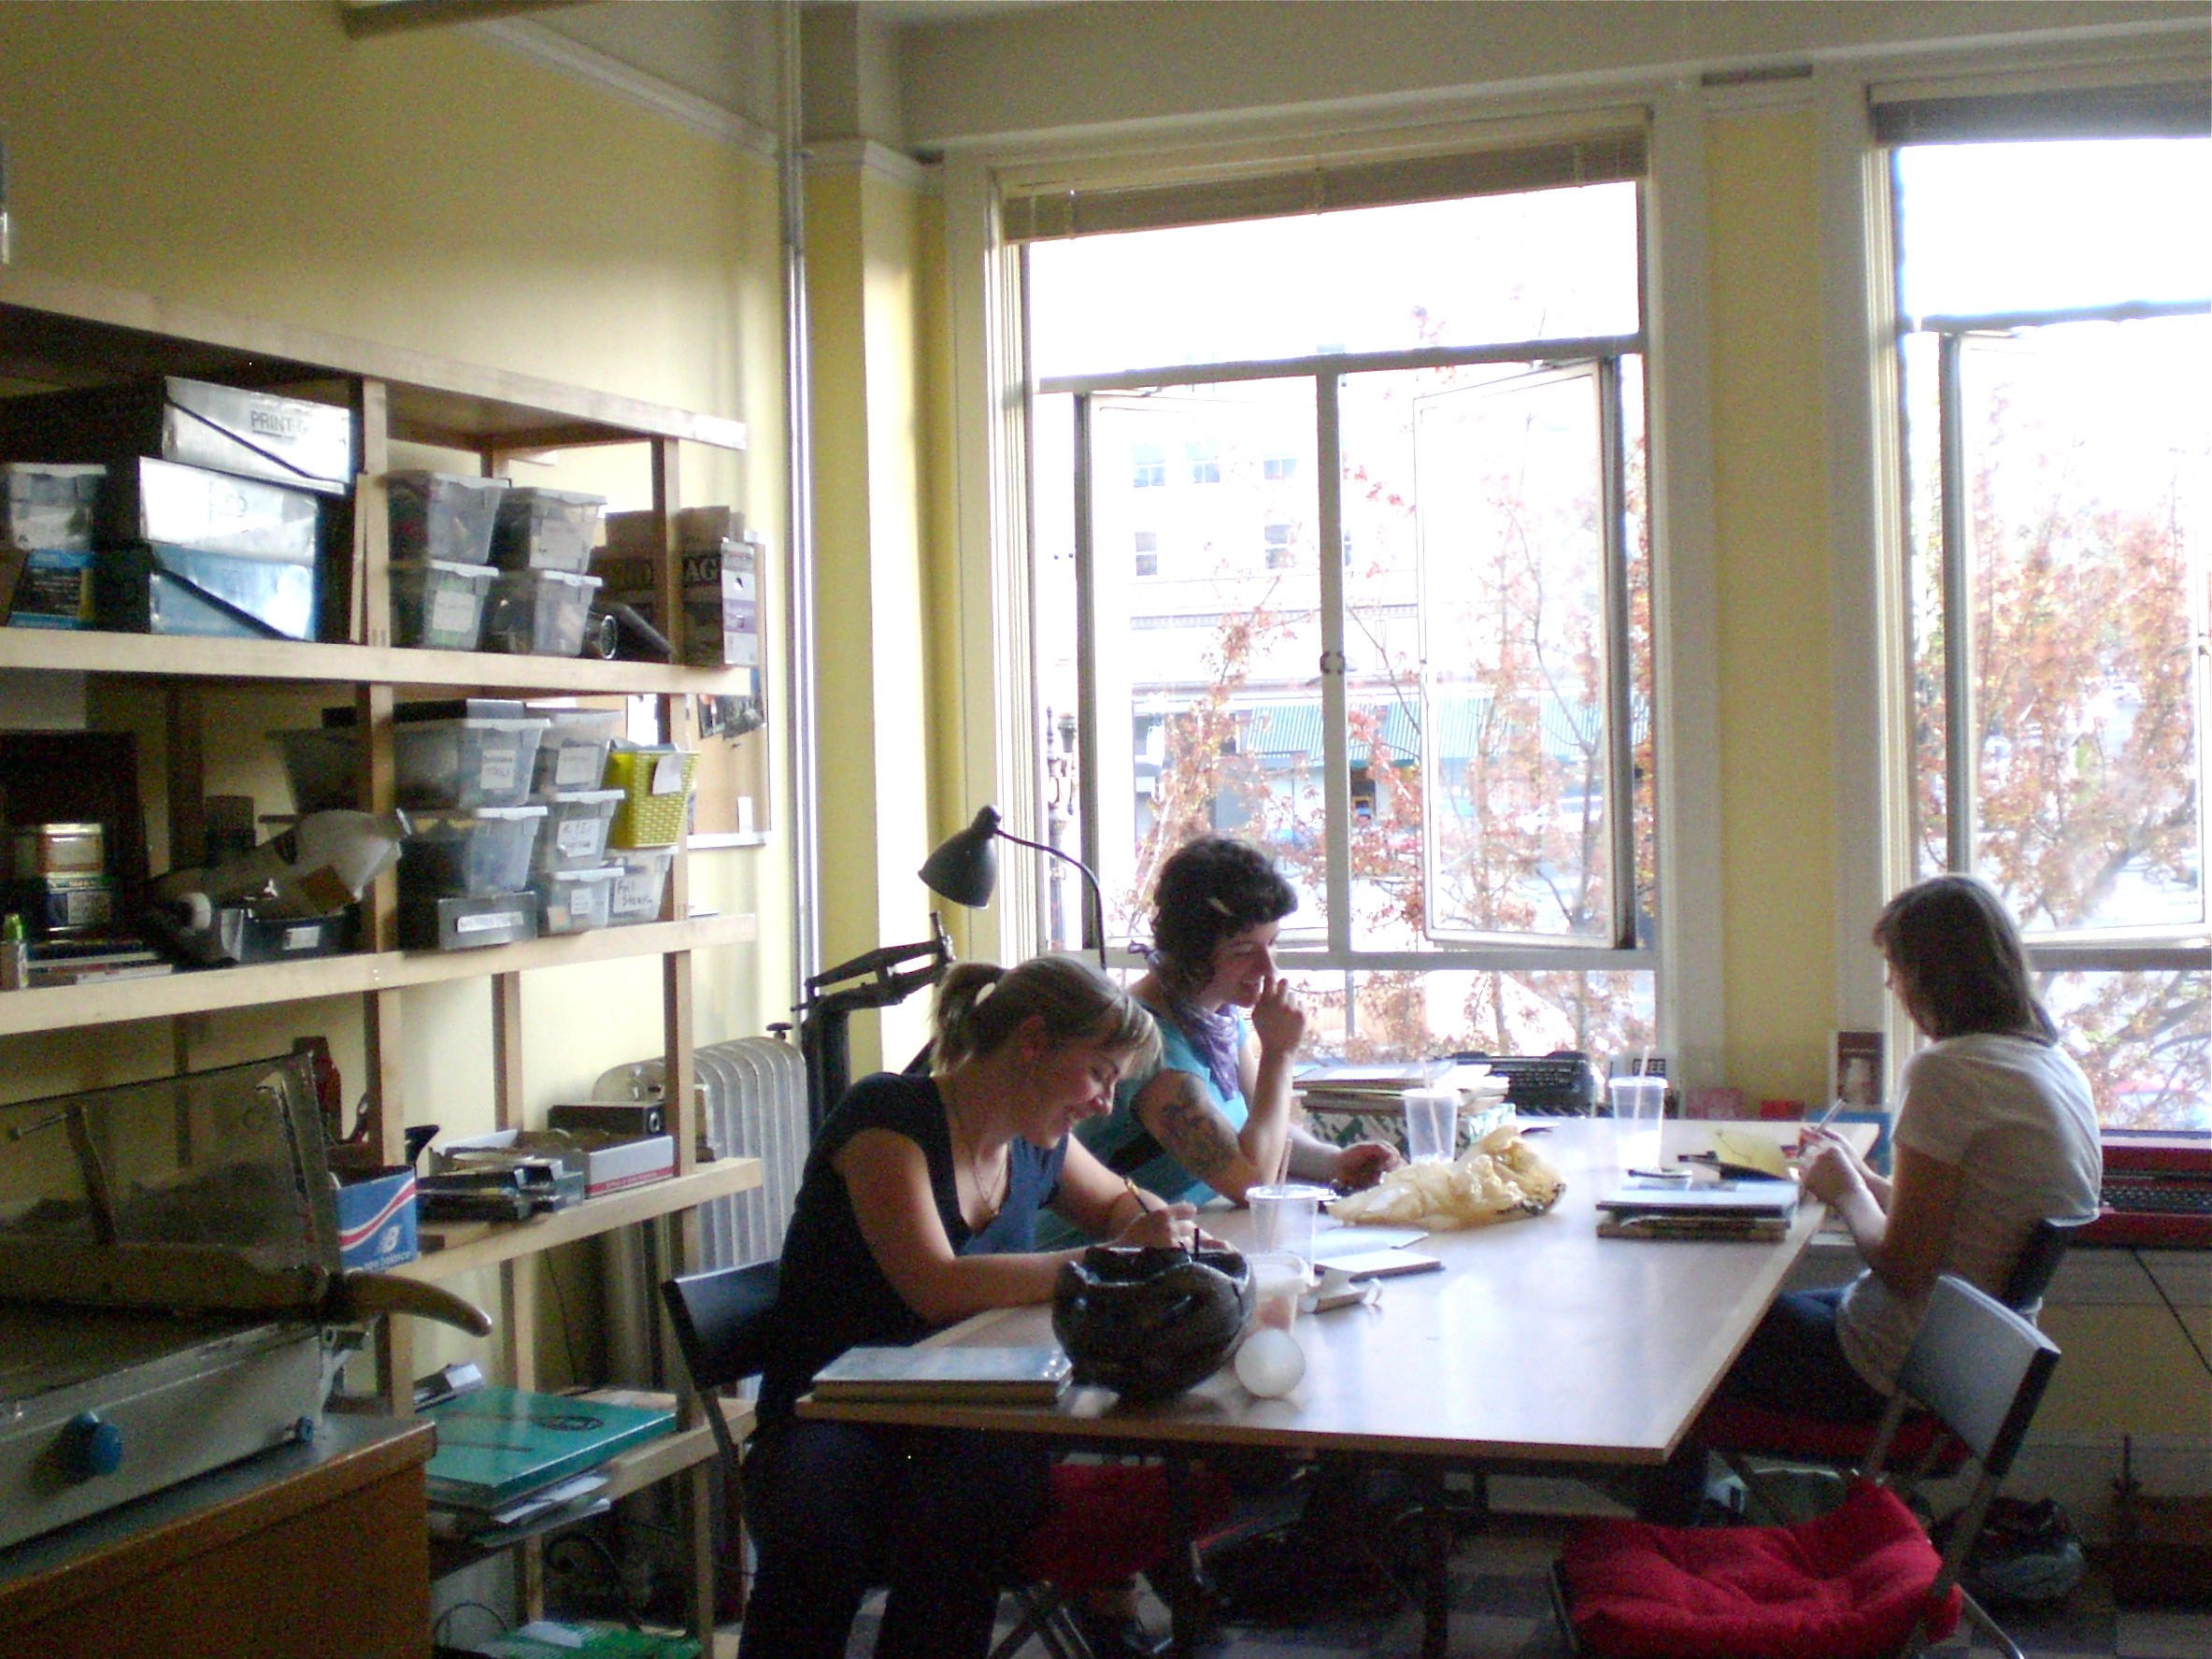 The main work room at the IPRC